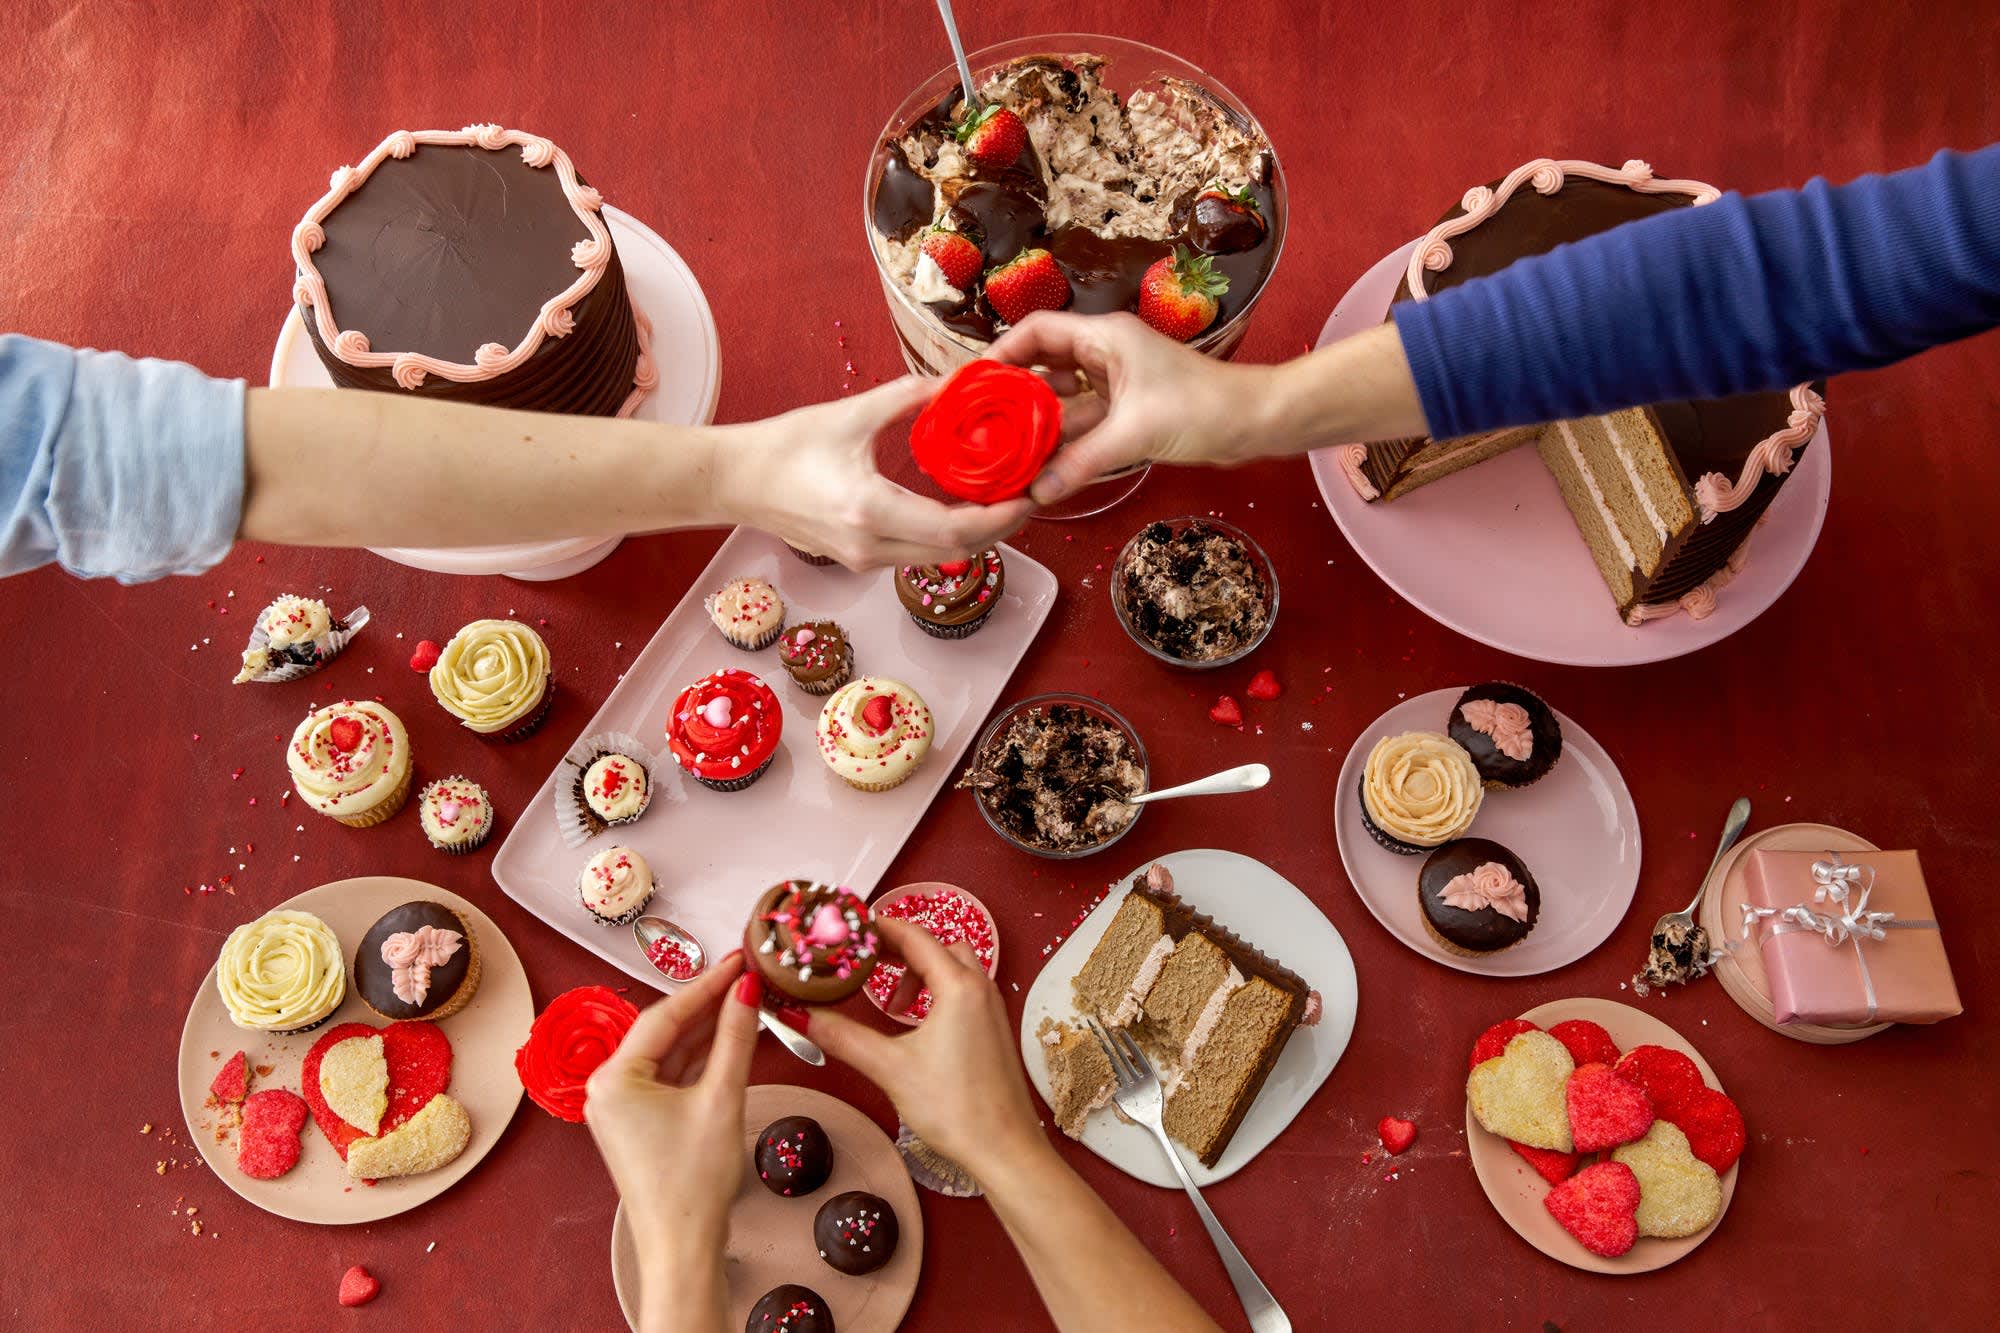 Food Gifts for your boyfriend on Valentine’s Day